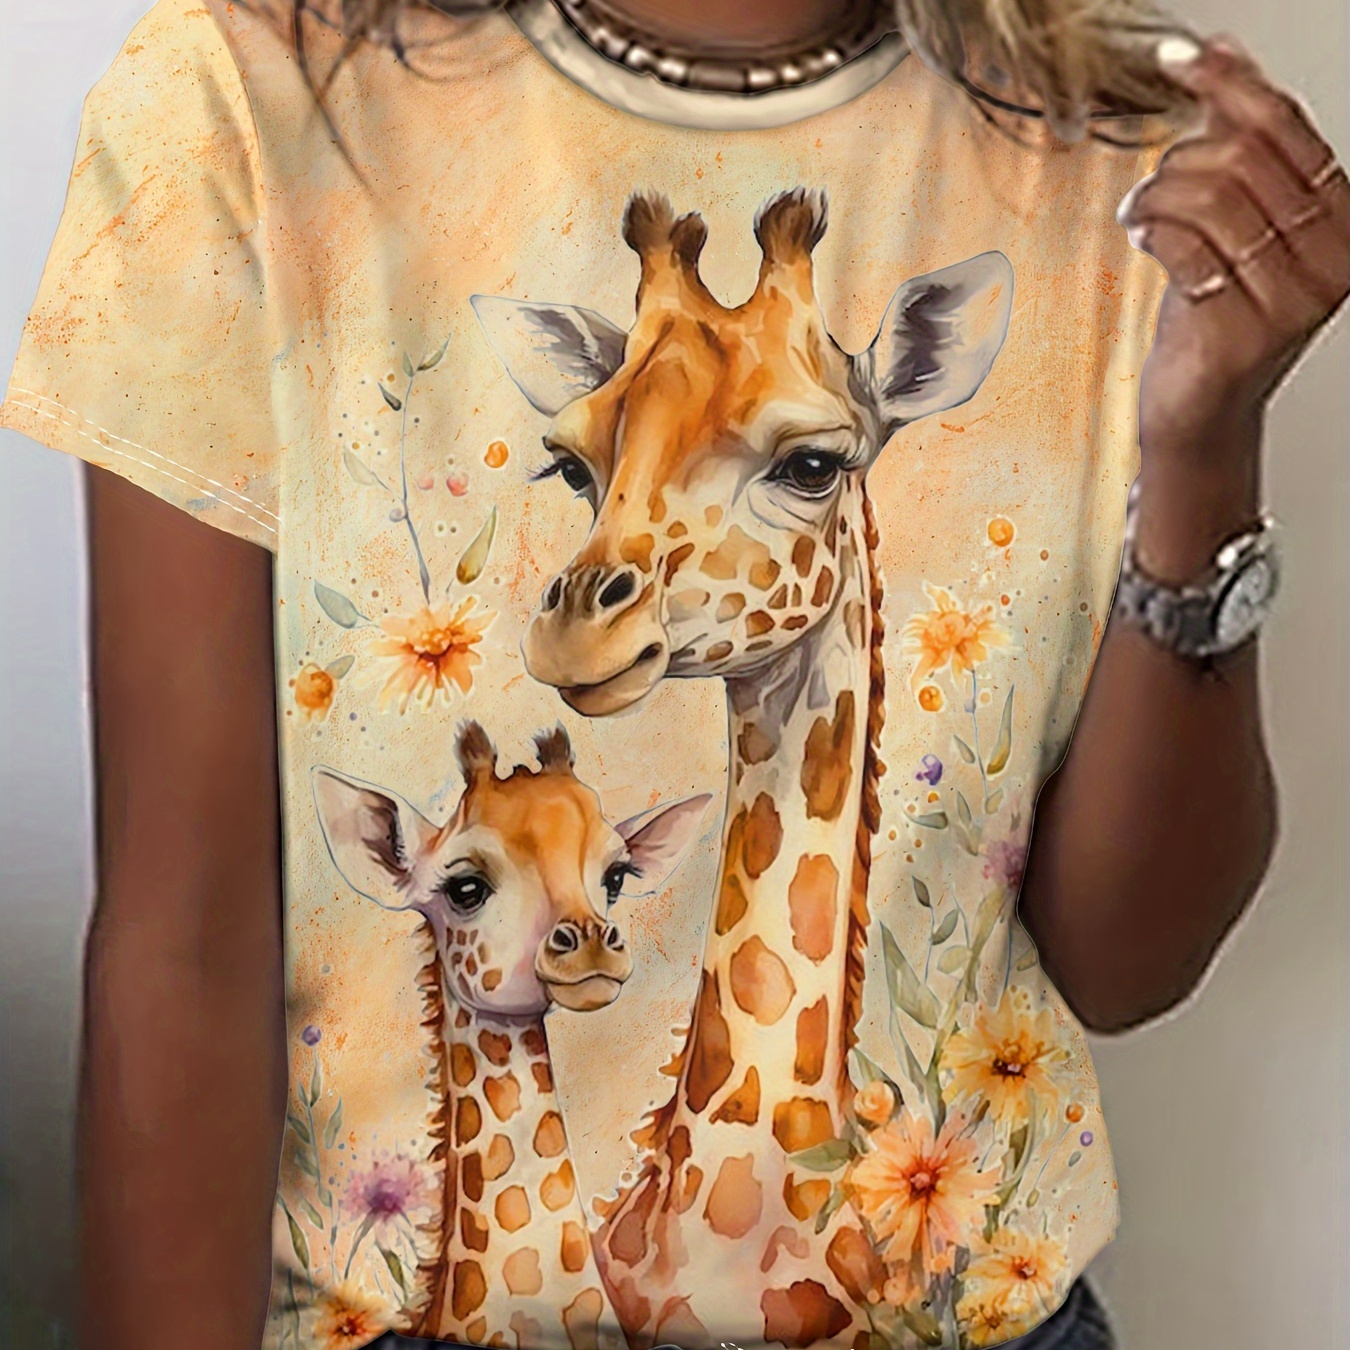 

Giraffe & Floral Print Crew Neck T-shirt, Casual Short Sleeve Top For Spring & Summer, Women's Clothing